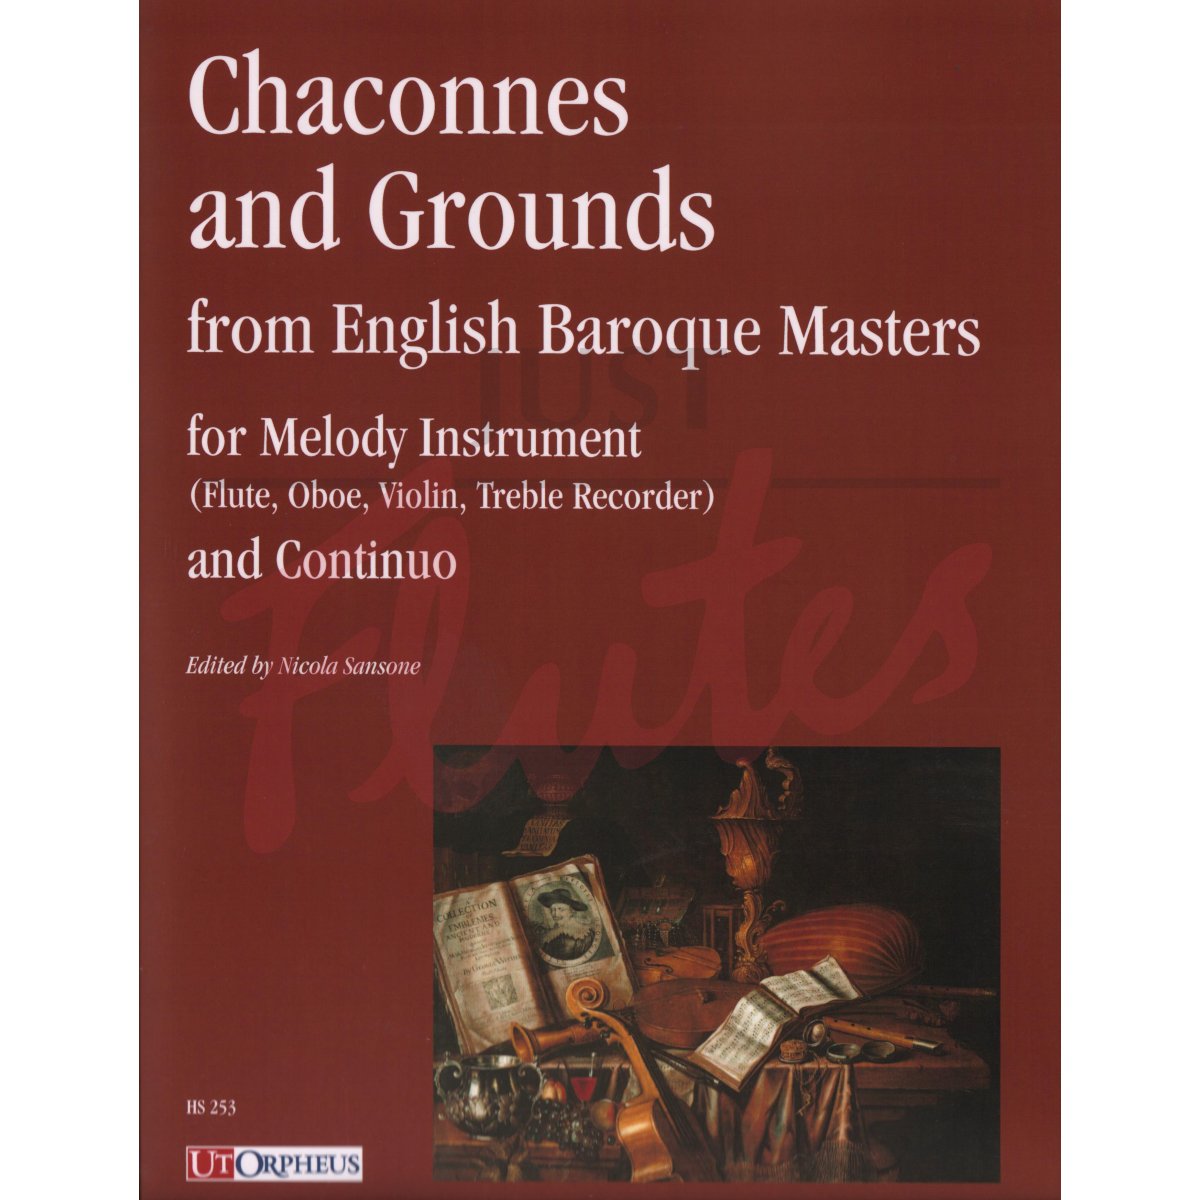 Chaconnes and Grounds from English Baroque Masters